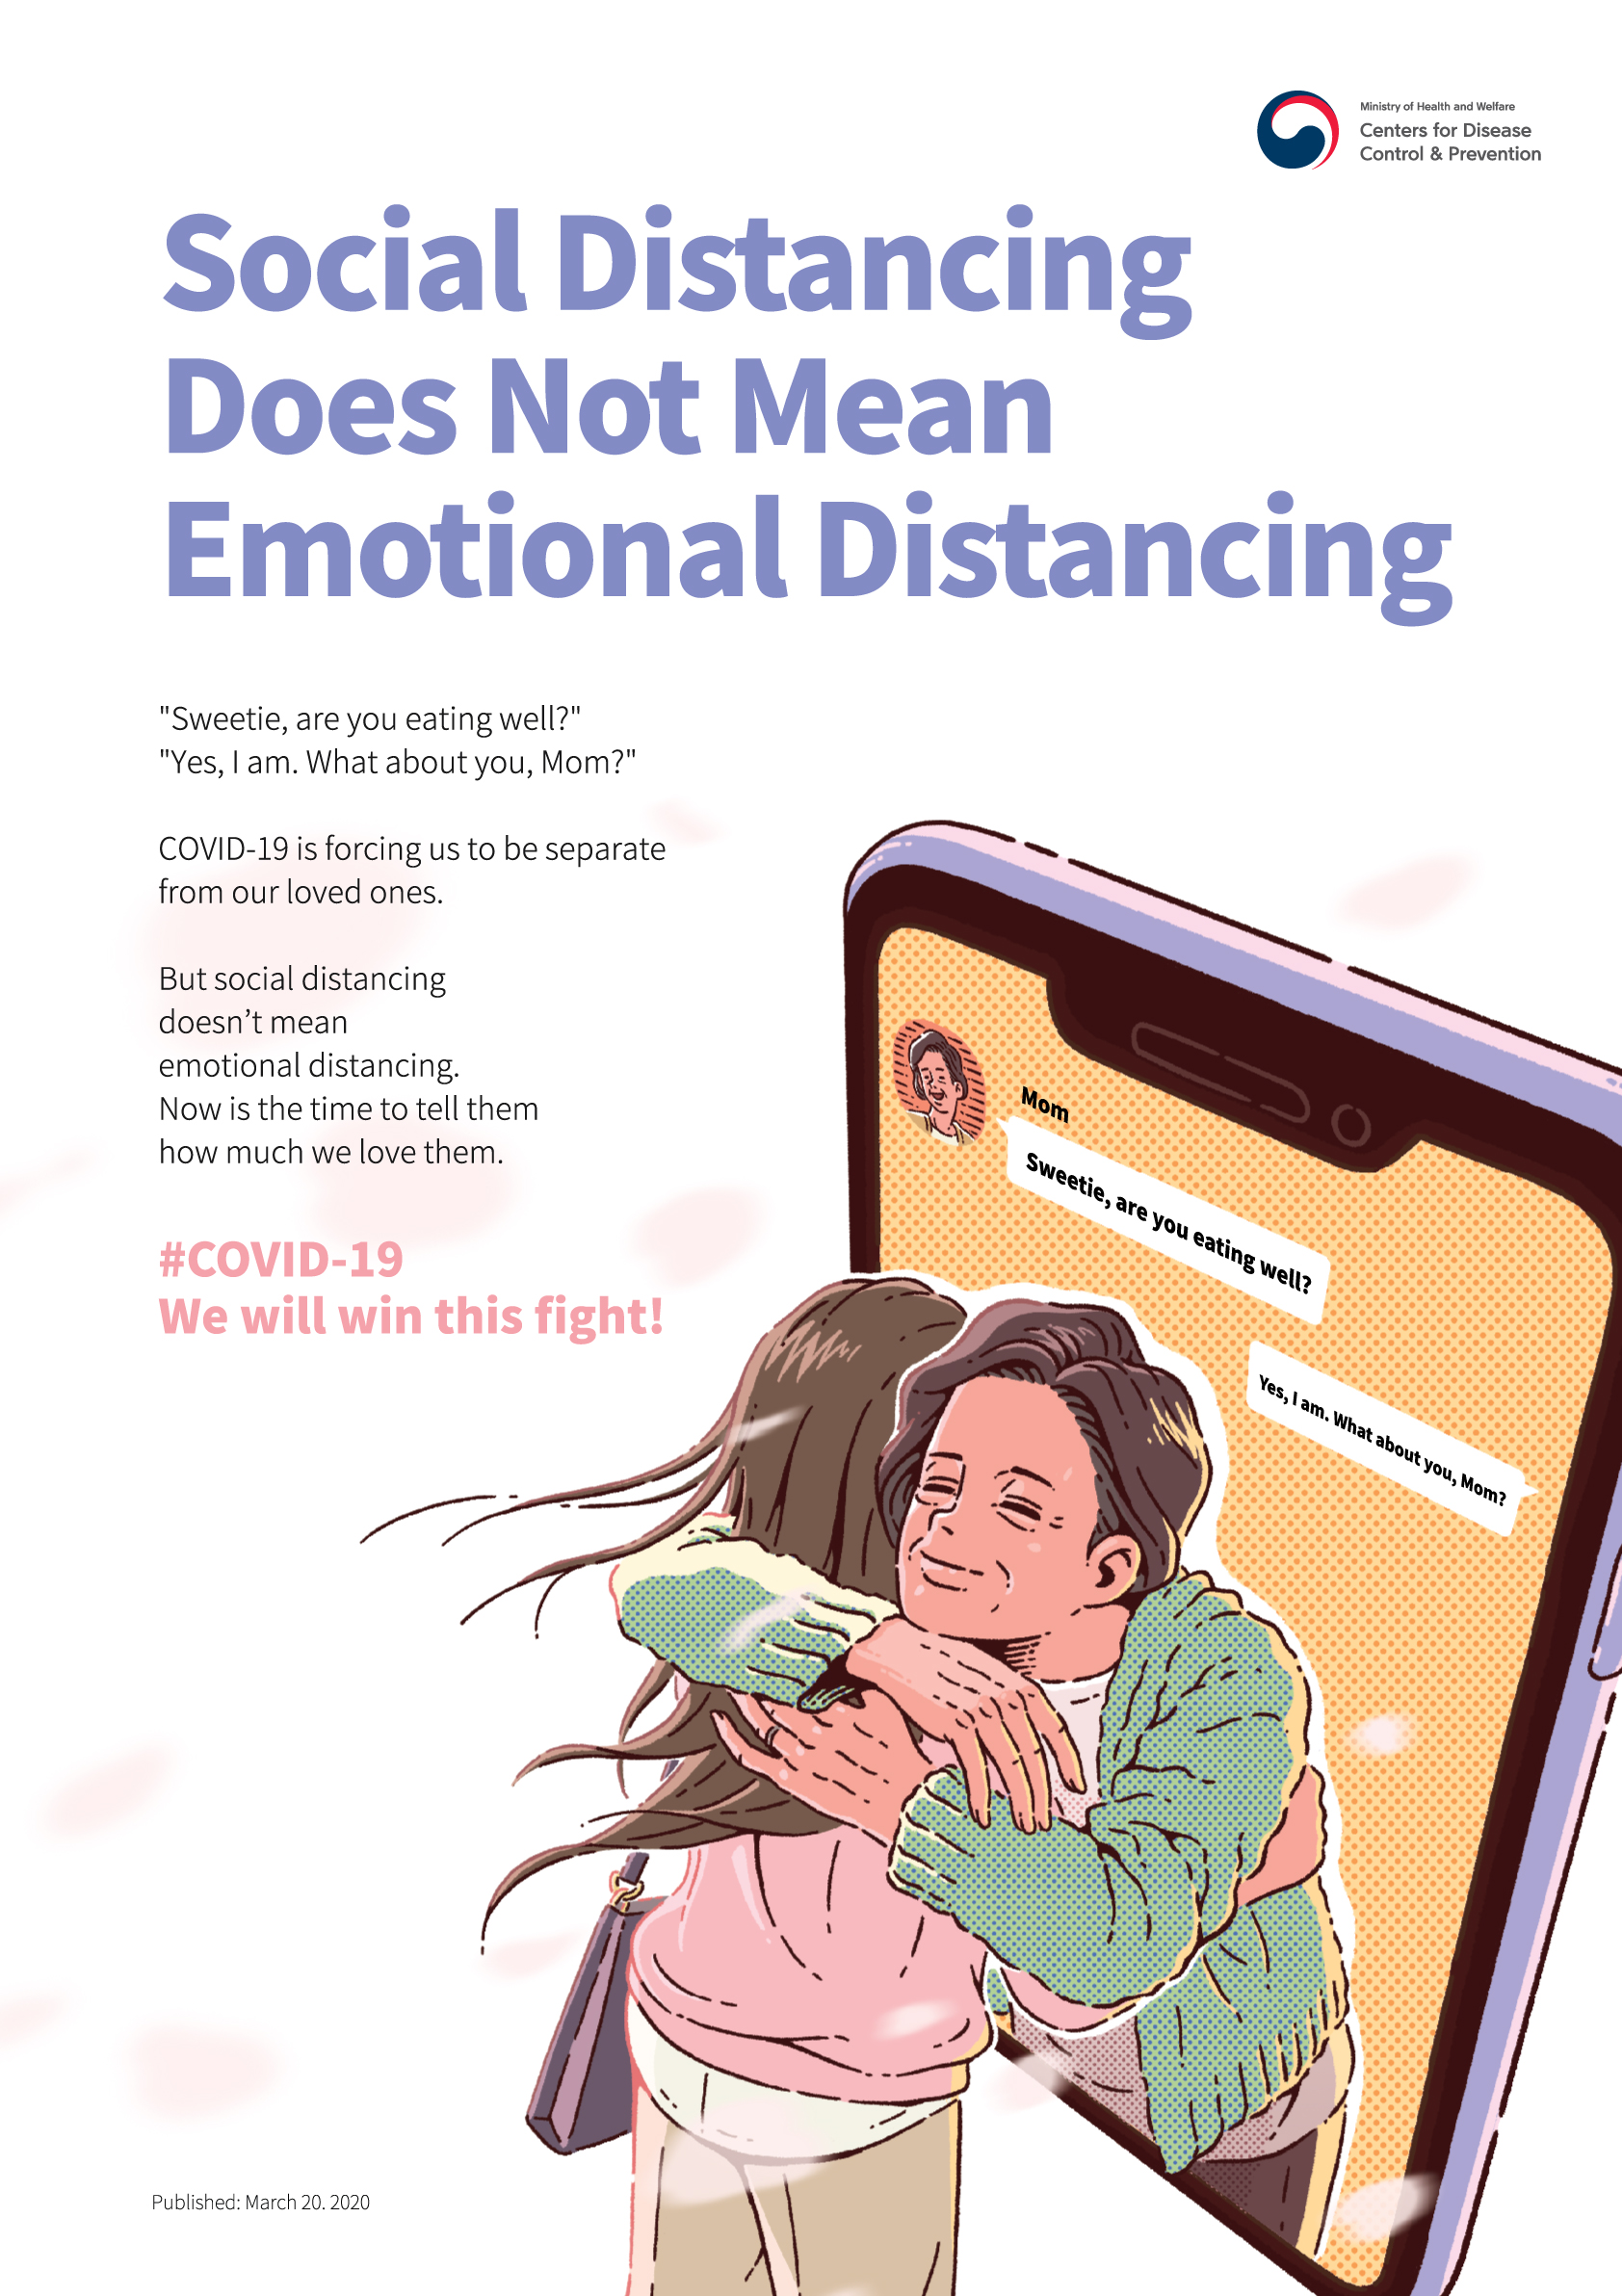 social Distancing Does Not Mean Emotional Distancing "sweetie, are you eating well?" "yes, I am. What about you, Mom?" COVID-19 is forcing us to be separate from our loved ones. But social distancing doesn't mean emontional distancing. Now is the time to tell them how much we love them. #COVID-19 We will win this fight! 2020.03.20. KCDC